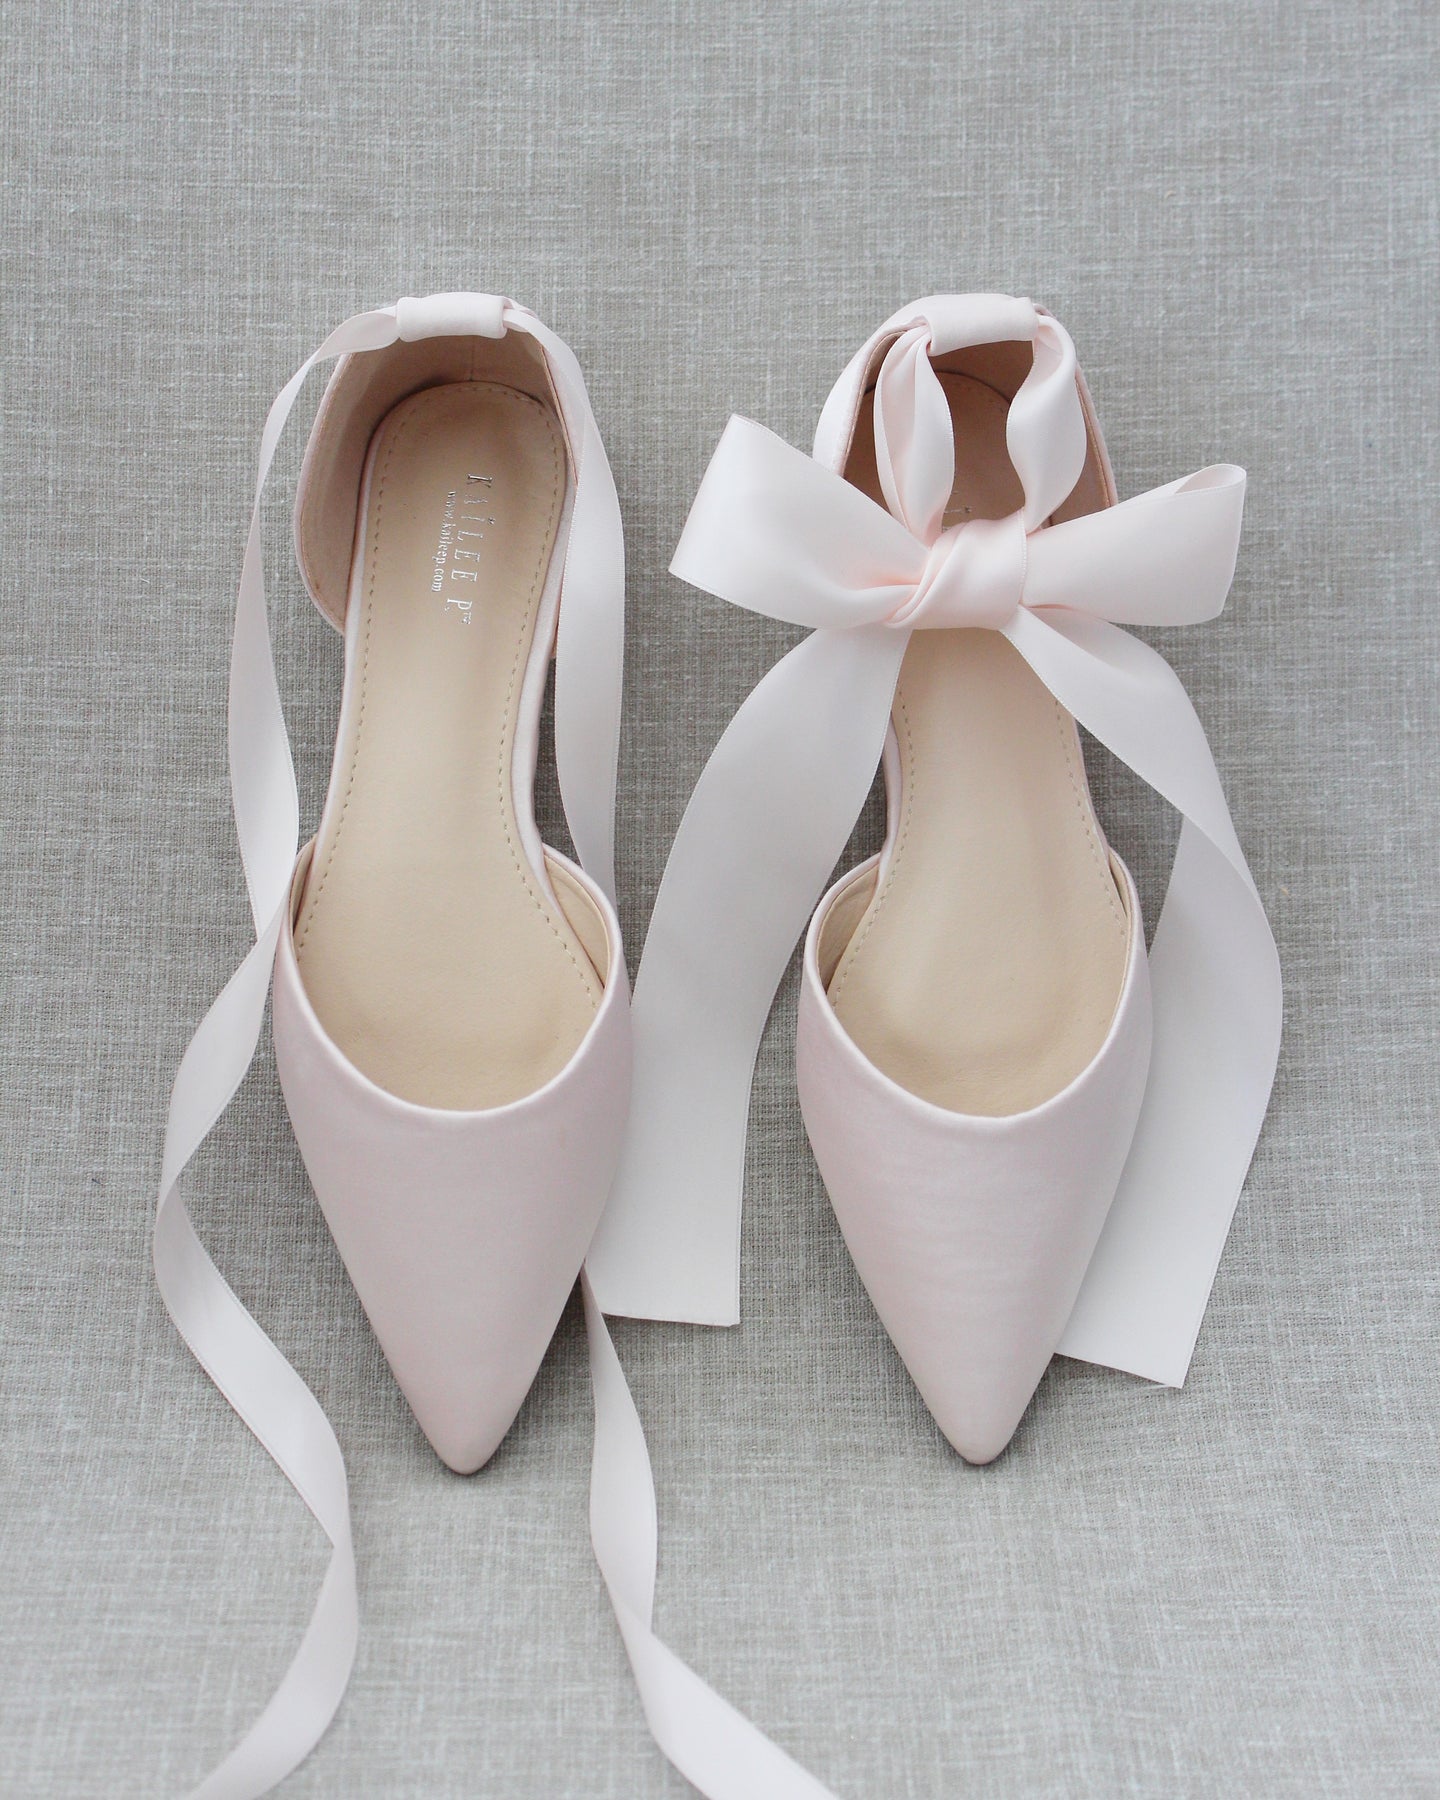 Dusty Pink Satin Pointy Toe Flats with Satin Ankle Tie or Ballerina ...